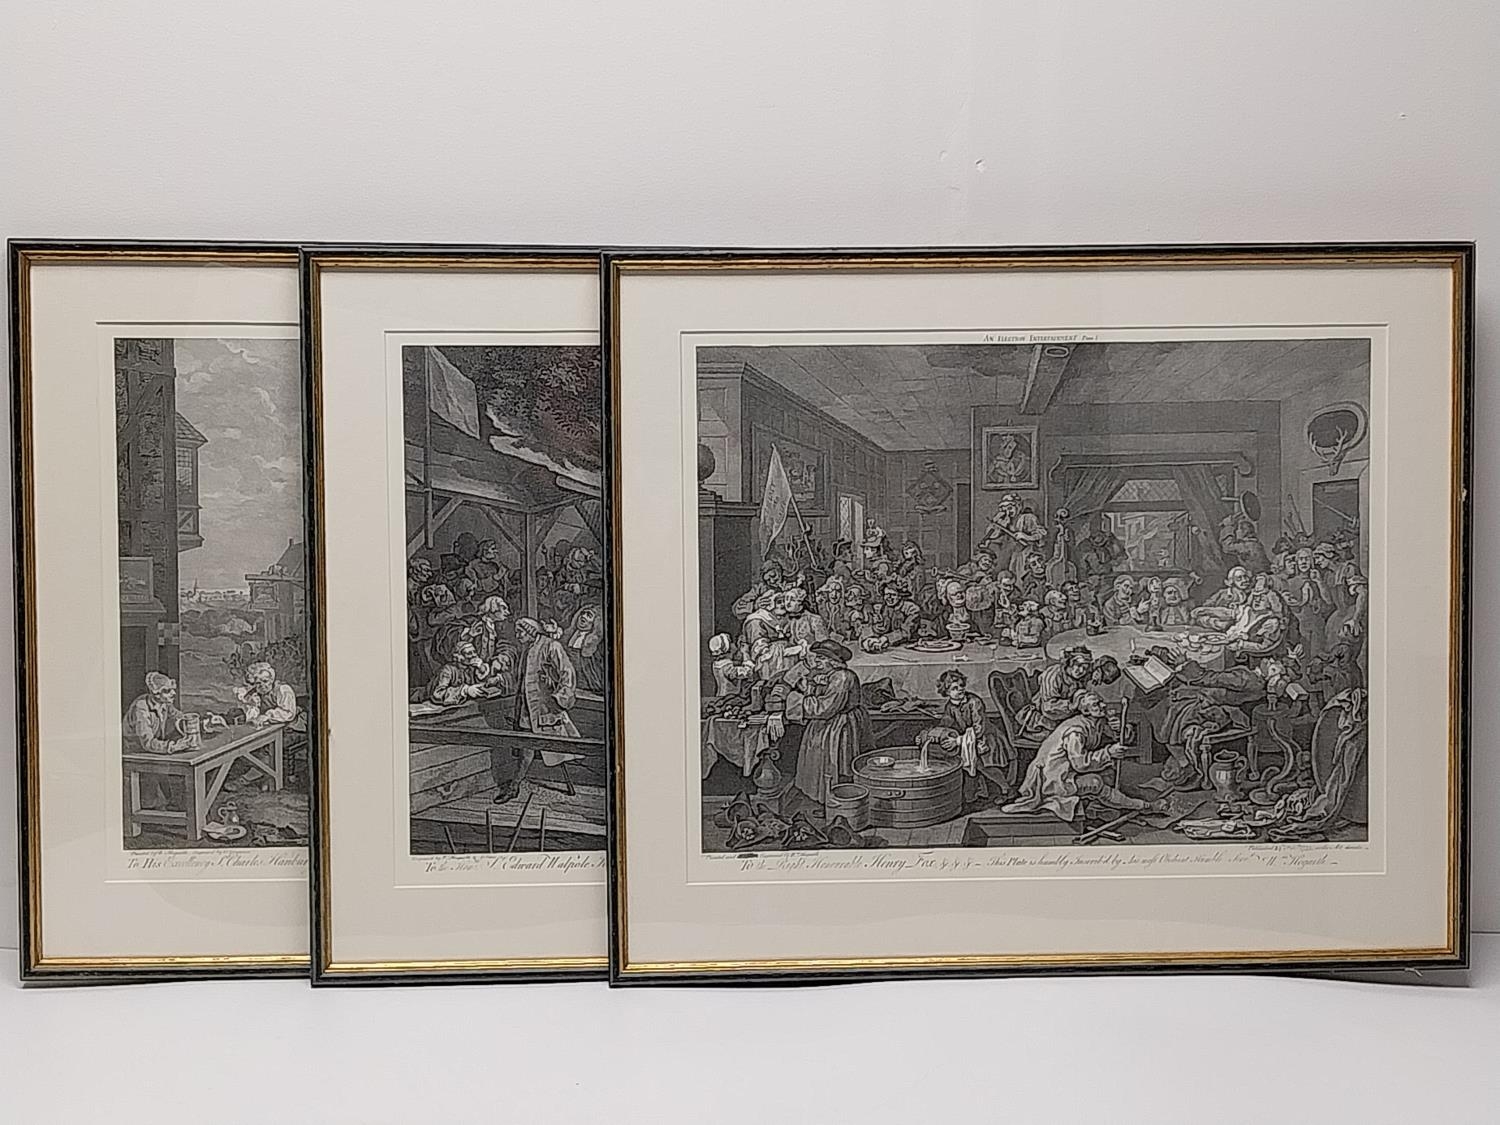 After Willliam Hogarth, three framed and glazed 19th century engravings, 'An election entertainment'